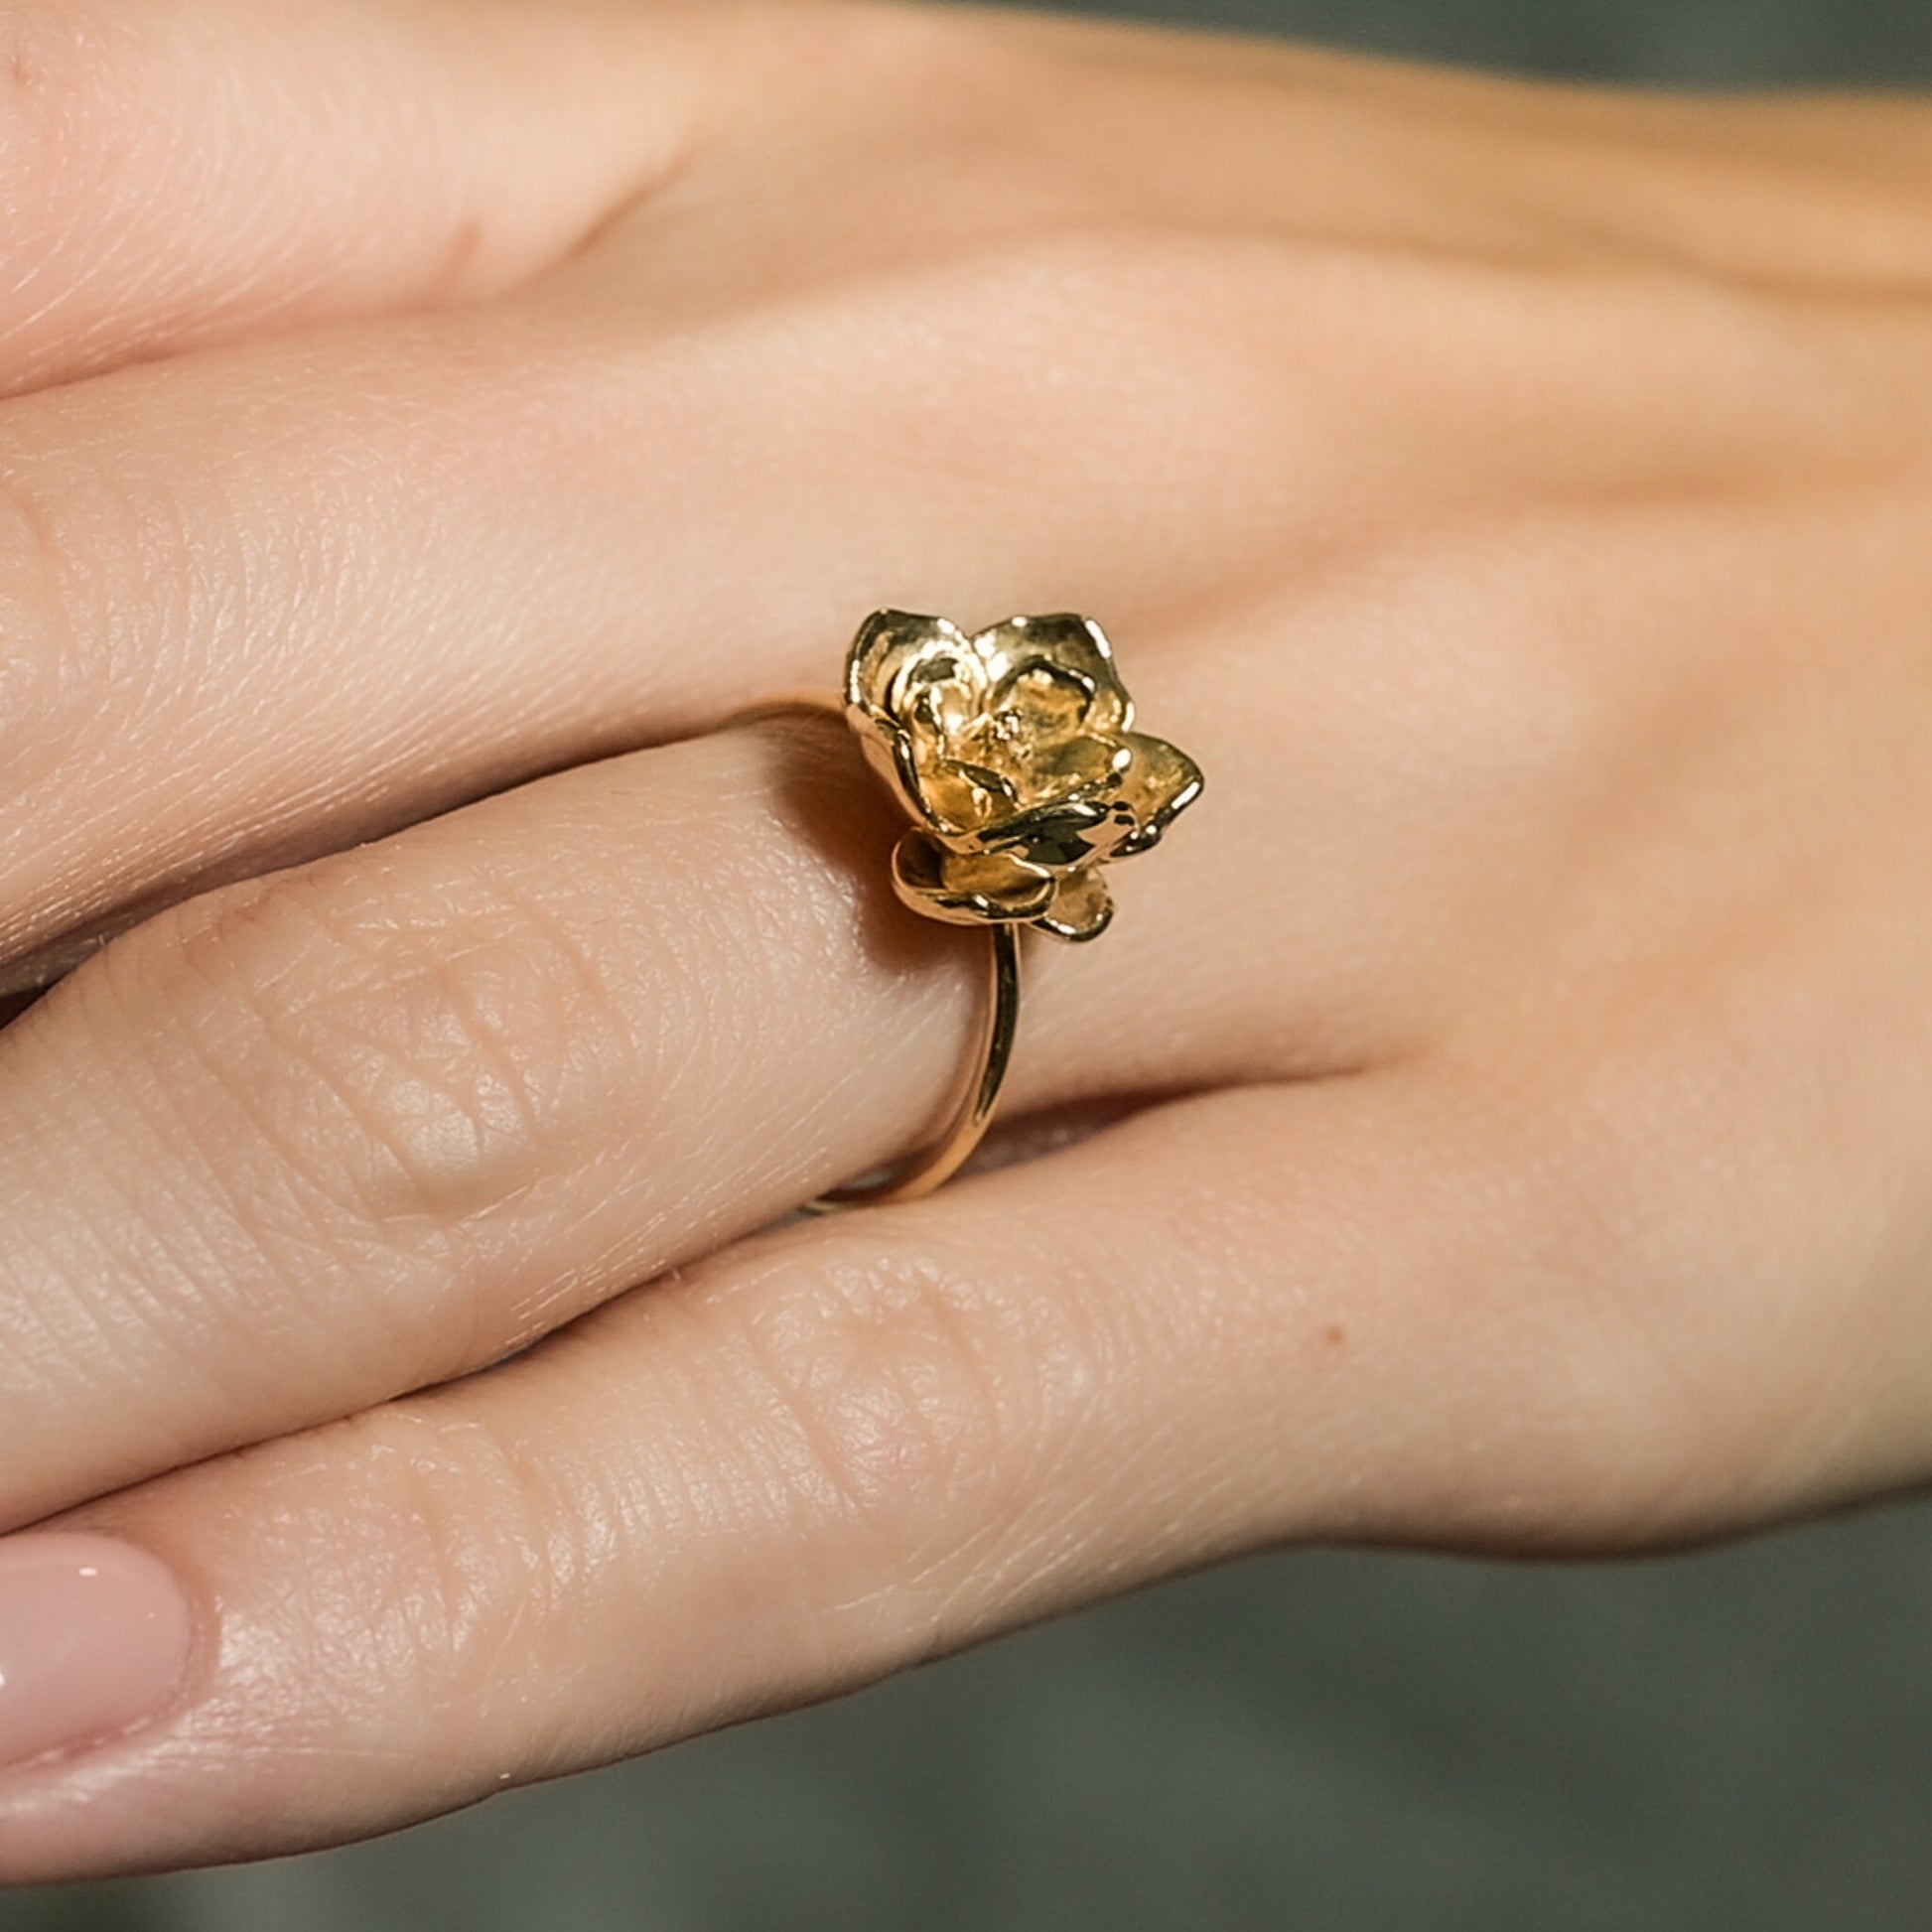 Dainty Magnolia Ring in Solid 14K Yellow Gold, 14k White Gold, 14K Rose Gold